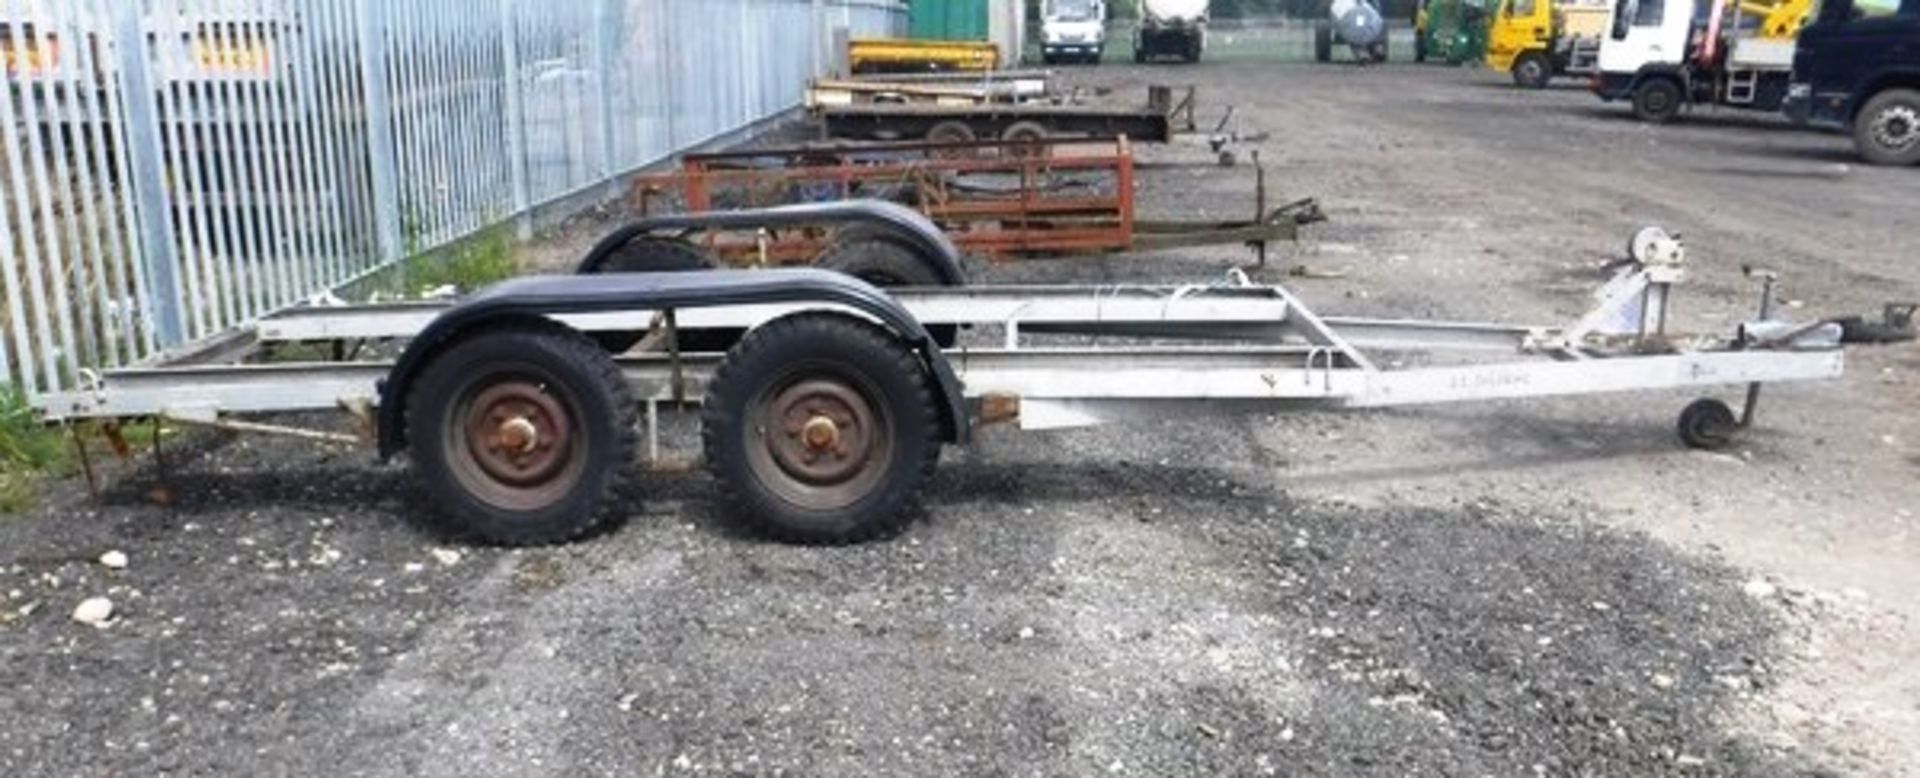 SL DALMORE twin axle car trailer. 6ft x 4ft - Image 3 of 4